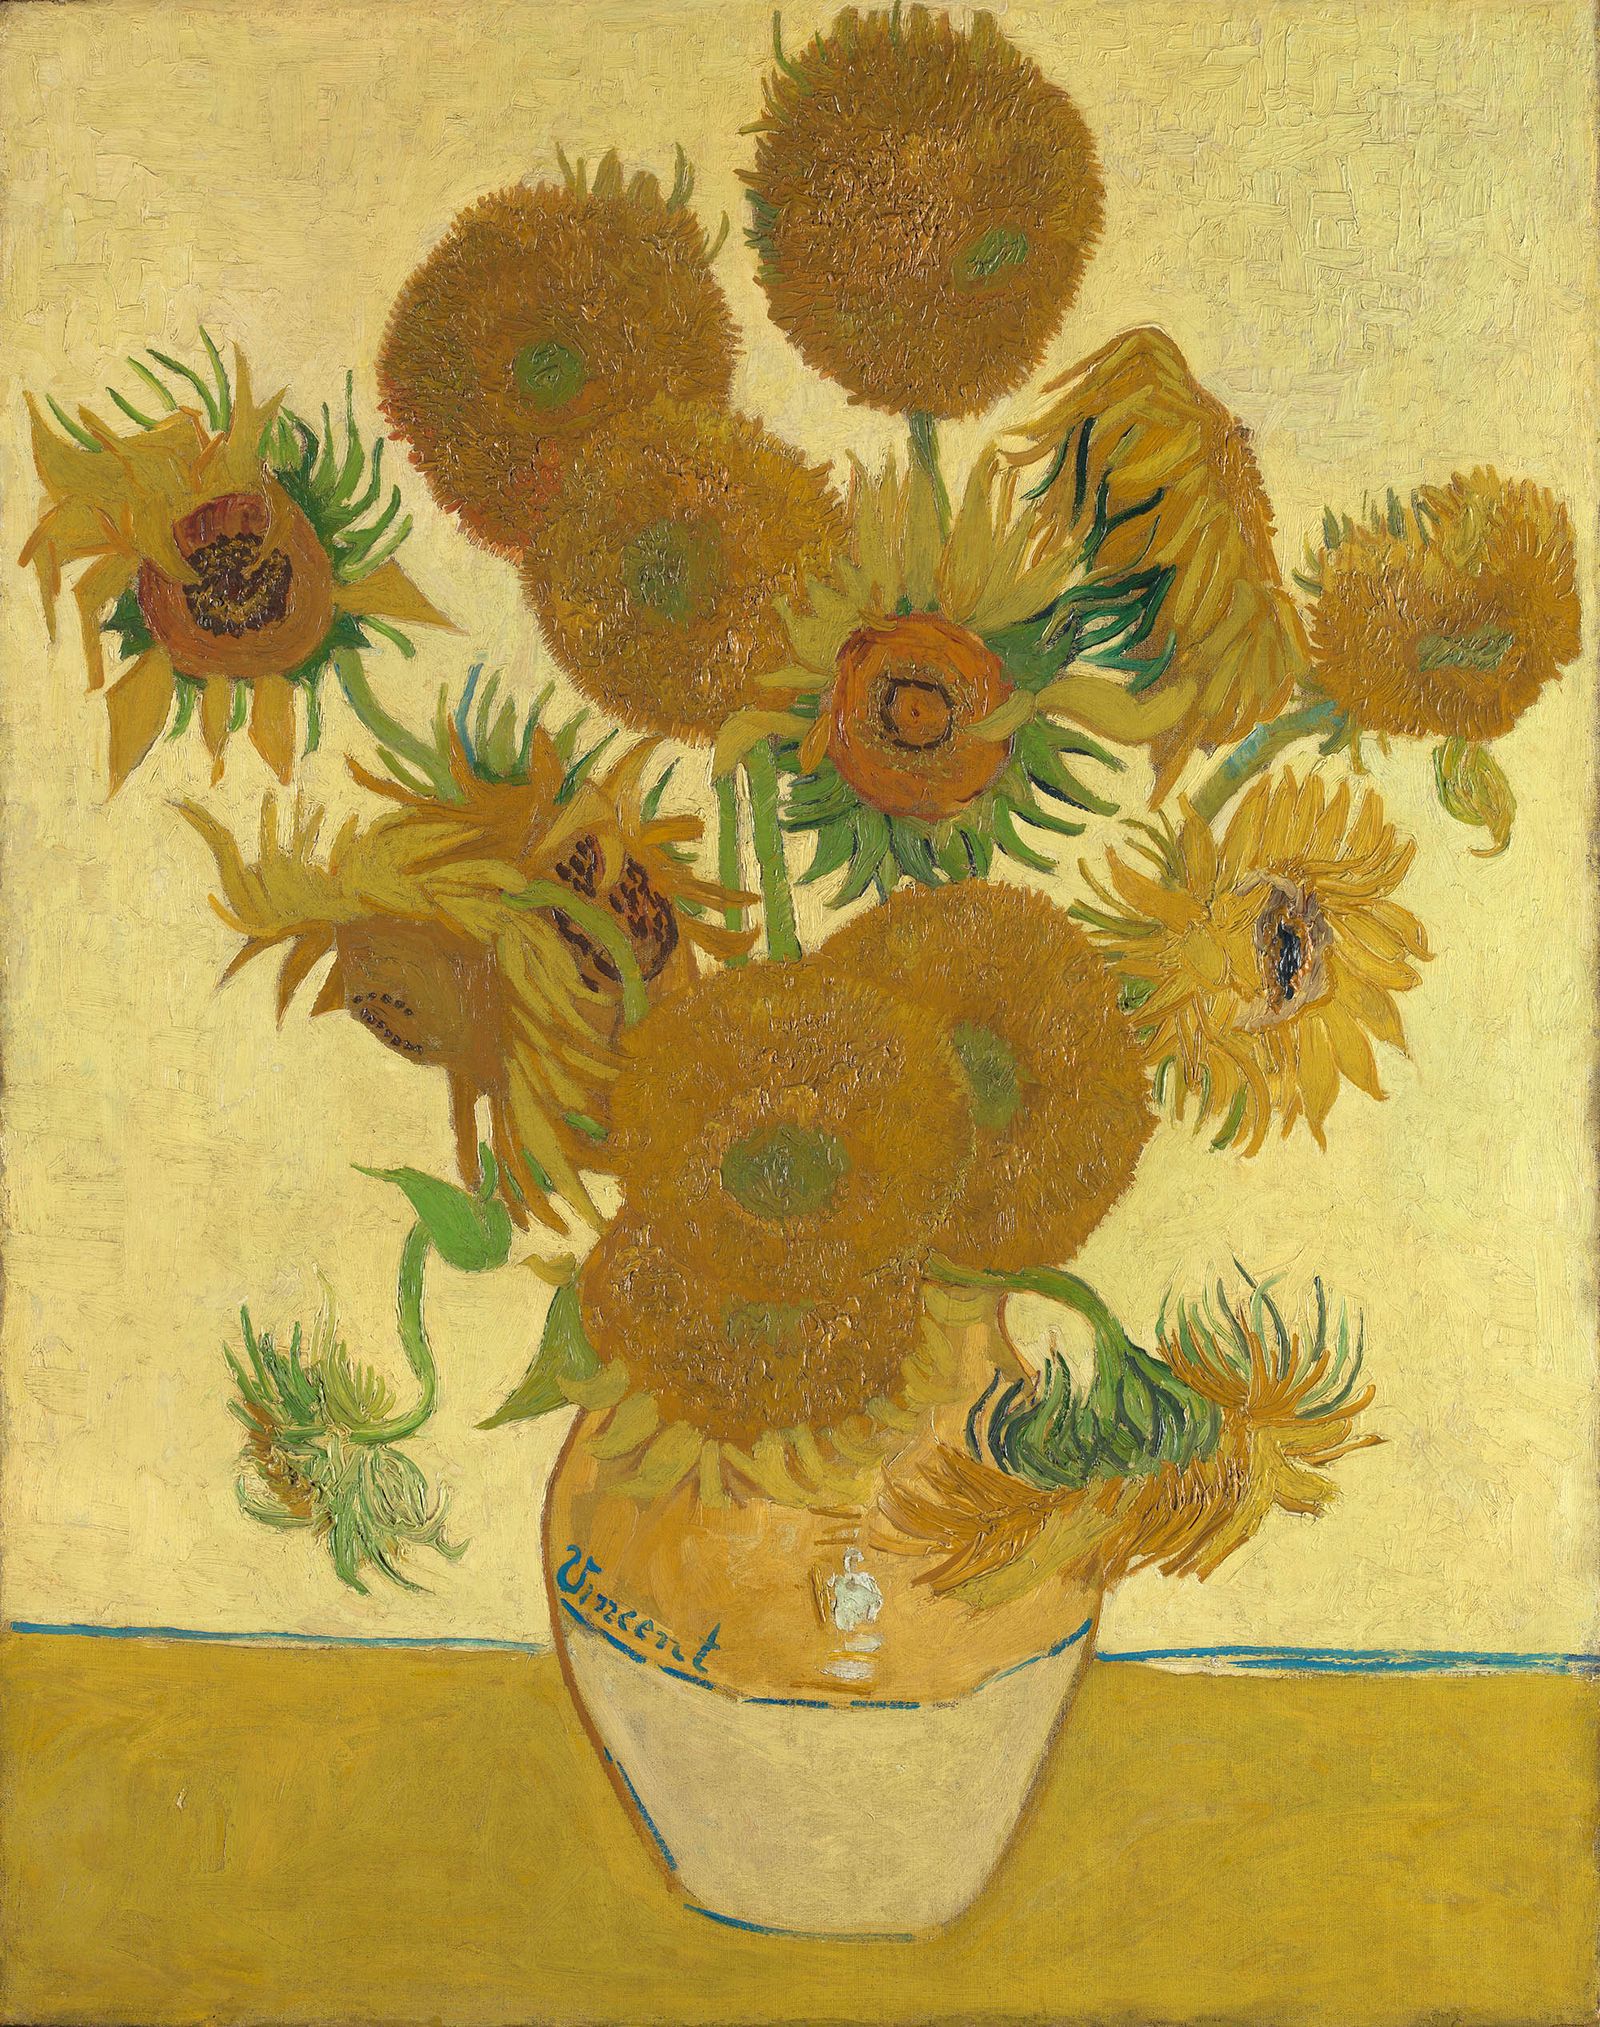 a vase of sunflowers on a yellow background